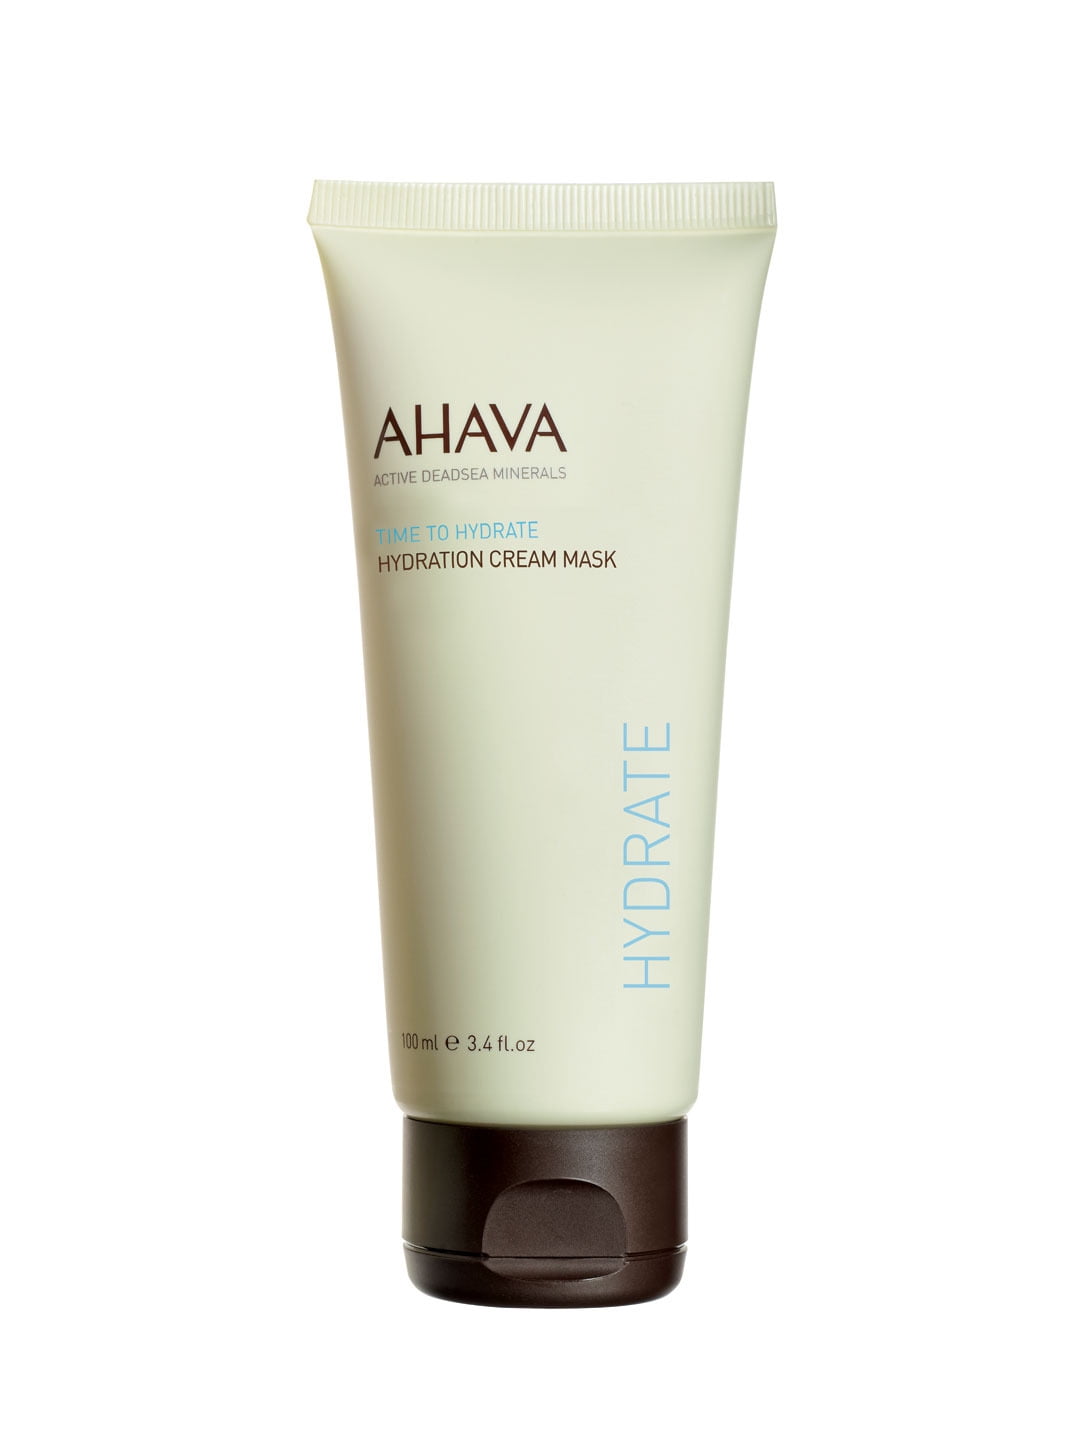 Cream Hydration Facial To - - oz. 3.4 Time AHAVA Hydrate Mask